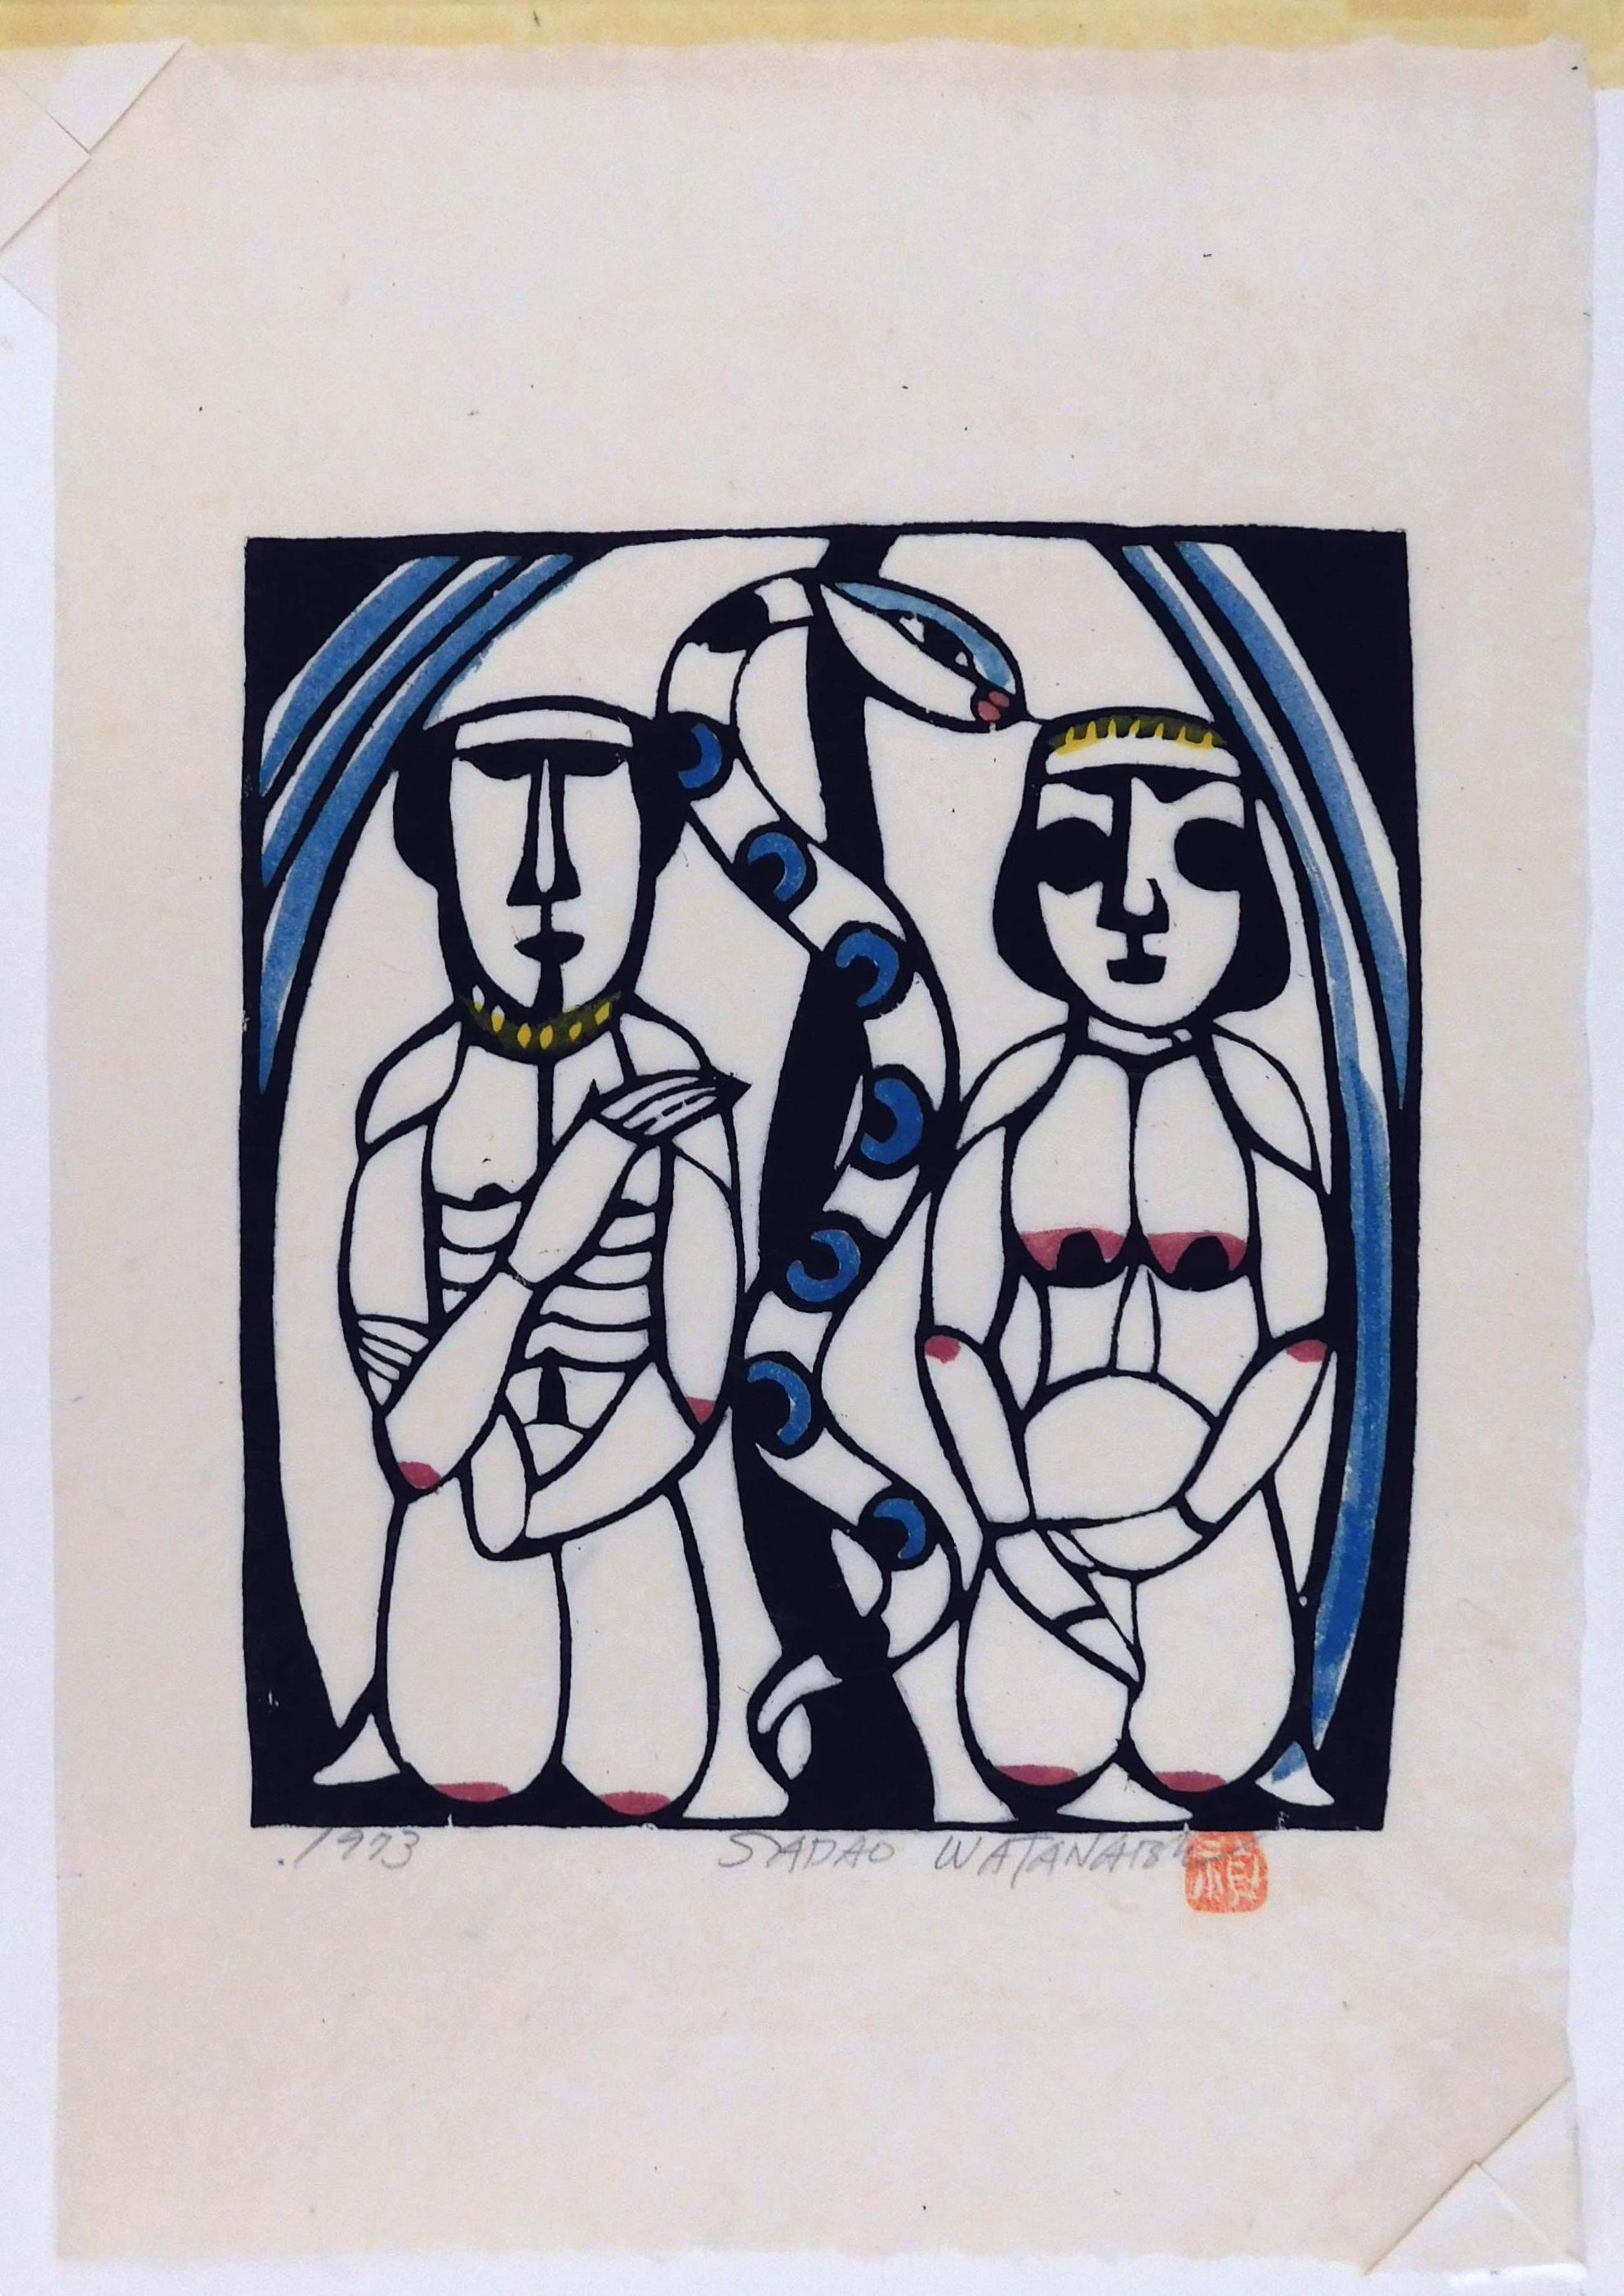 Stencil Print by Sadao Watanabe, hand colored on hand-made washi paper.
This image depicts Adam & Eve with the snake in the garden of  Eden from Genesis.
Artist’s chop mark and pencil signature are seen lower right. Dated (1973) lower left.
The work